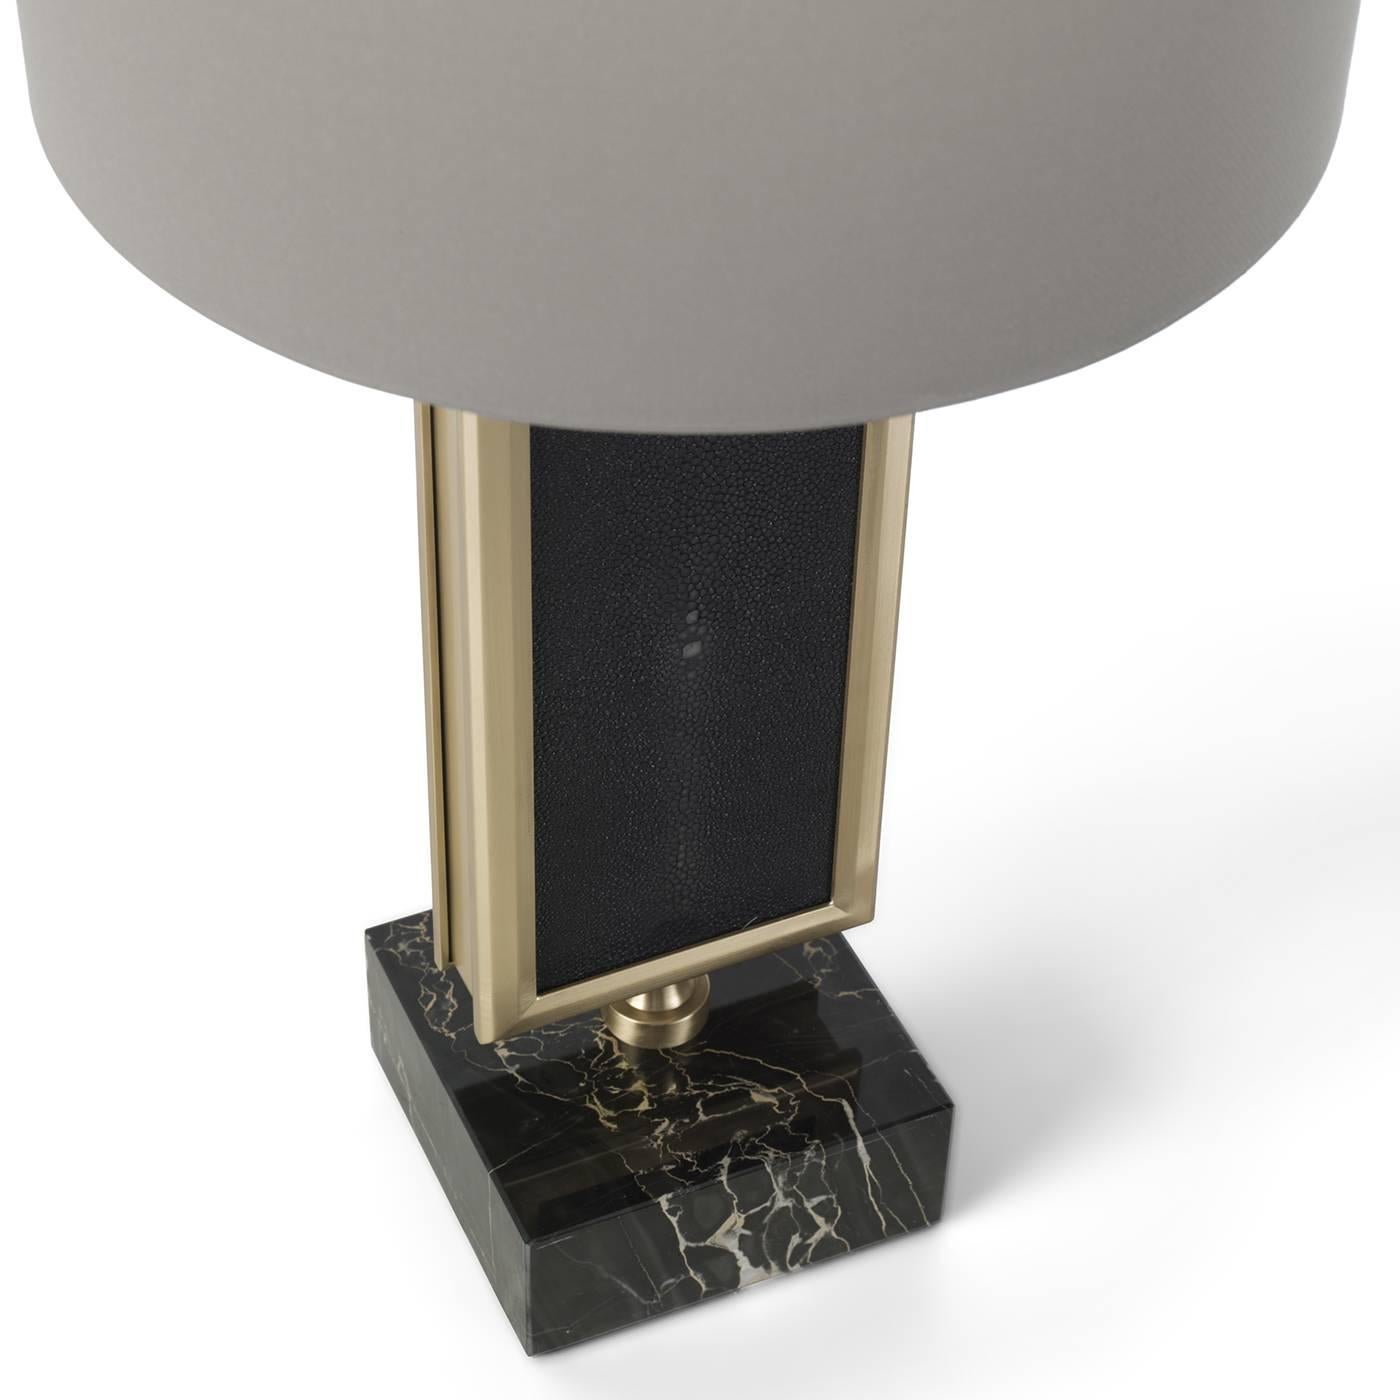 This sophisticated table lamp features noble materials and traditional craftsmanship combined with a contemporary design, for a timeless and elegant final effect that will make a statement in any decor. The base is a cube of Portoro marble that